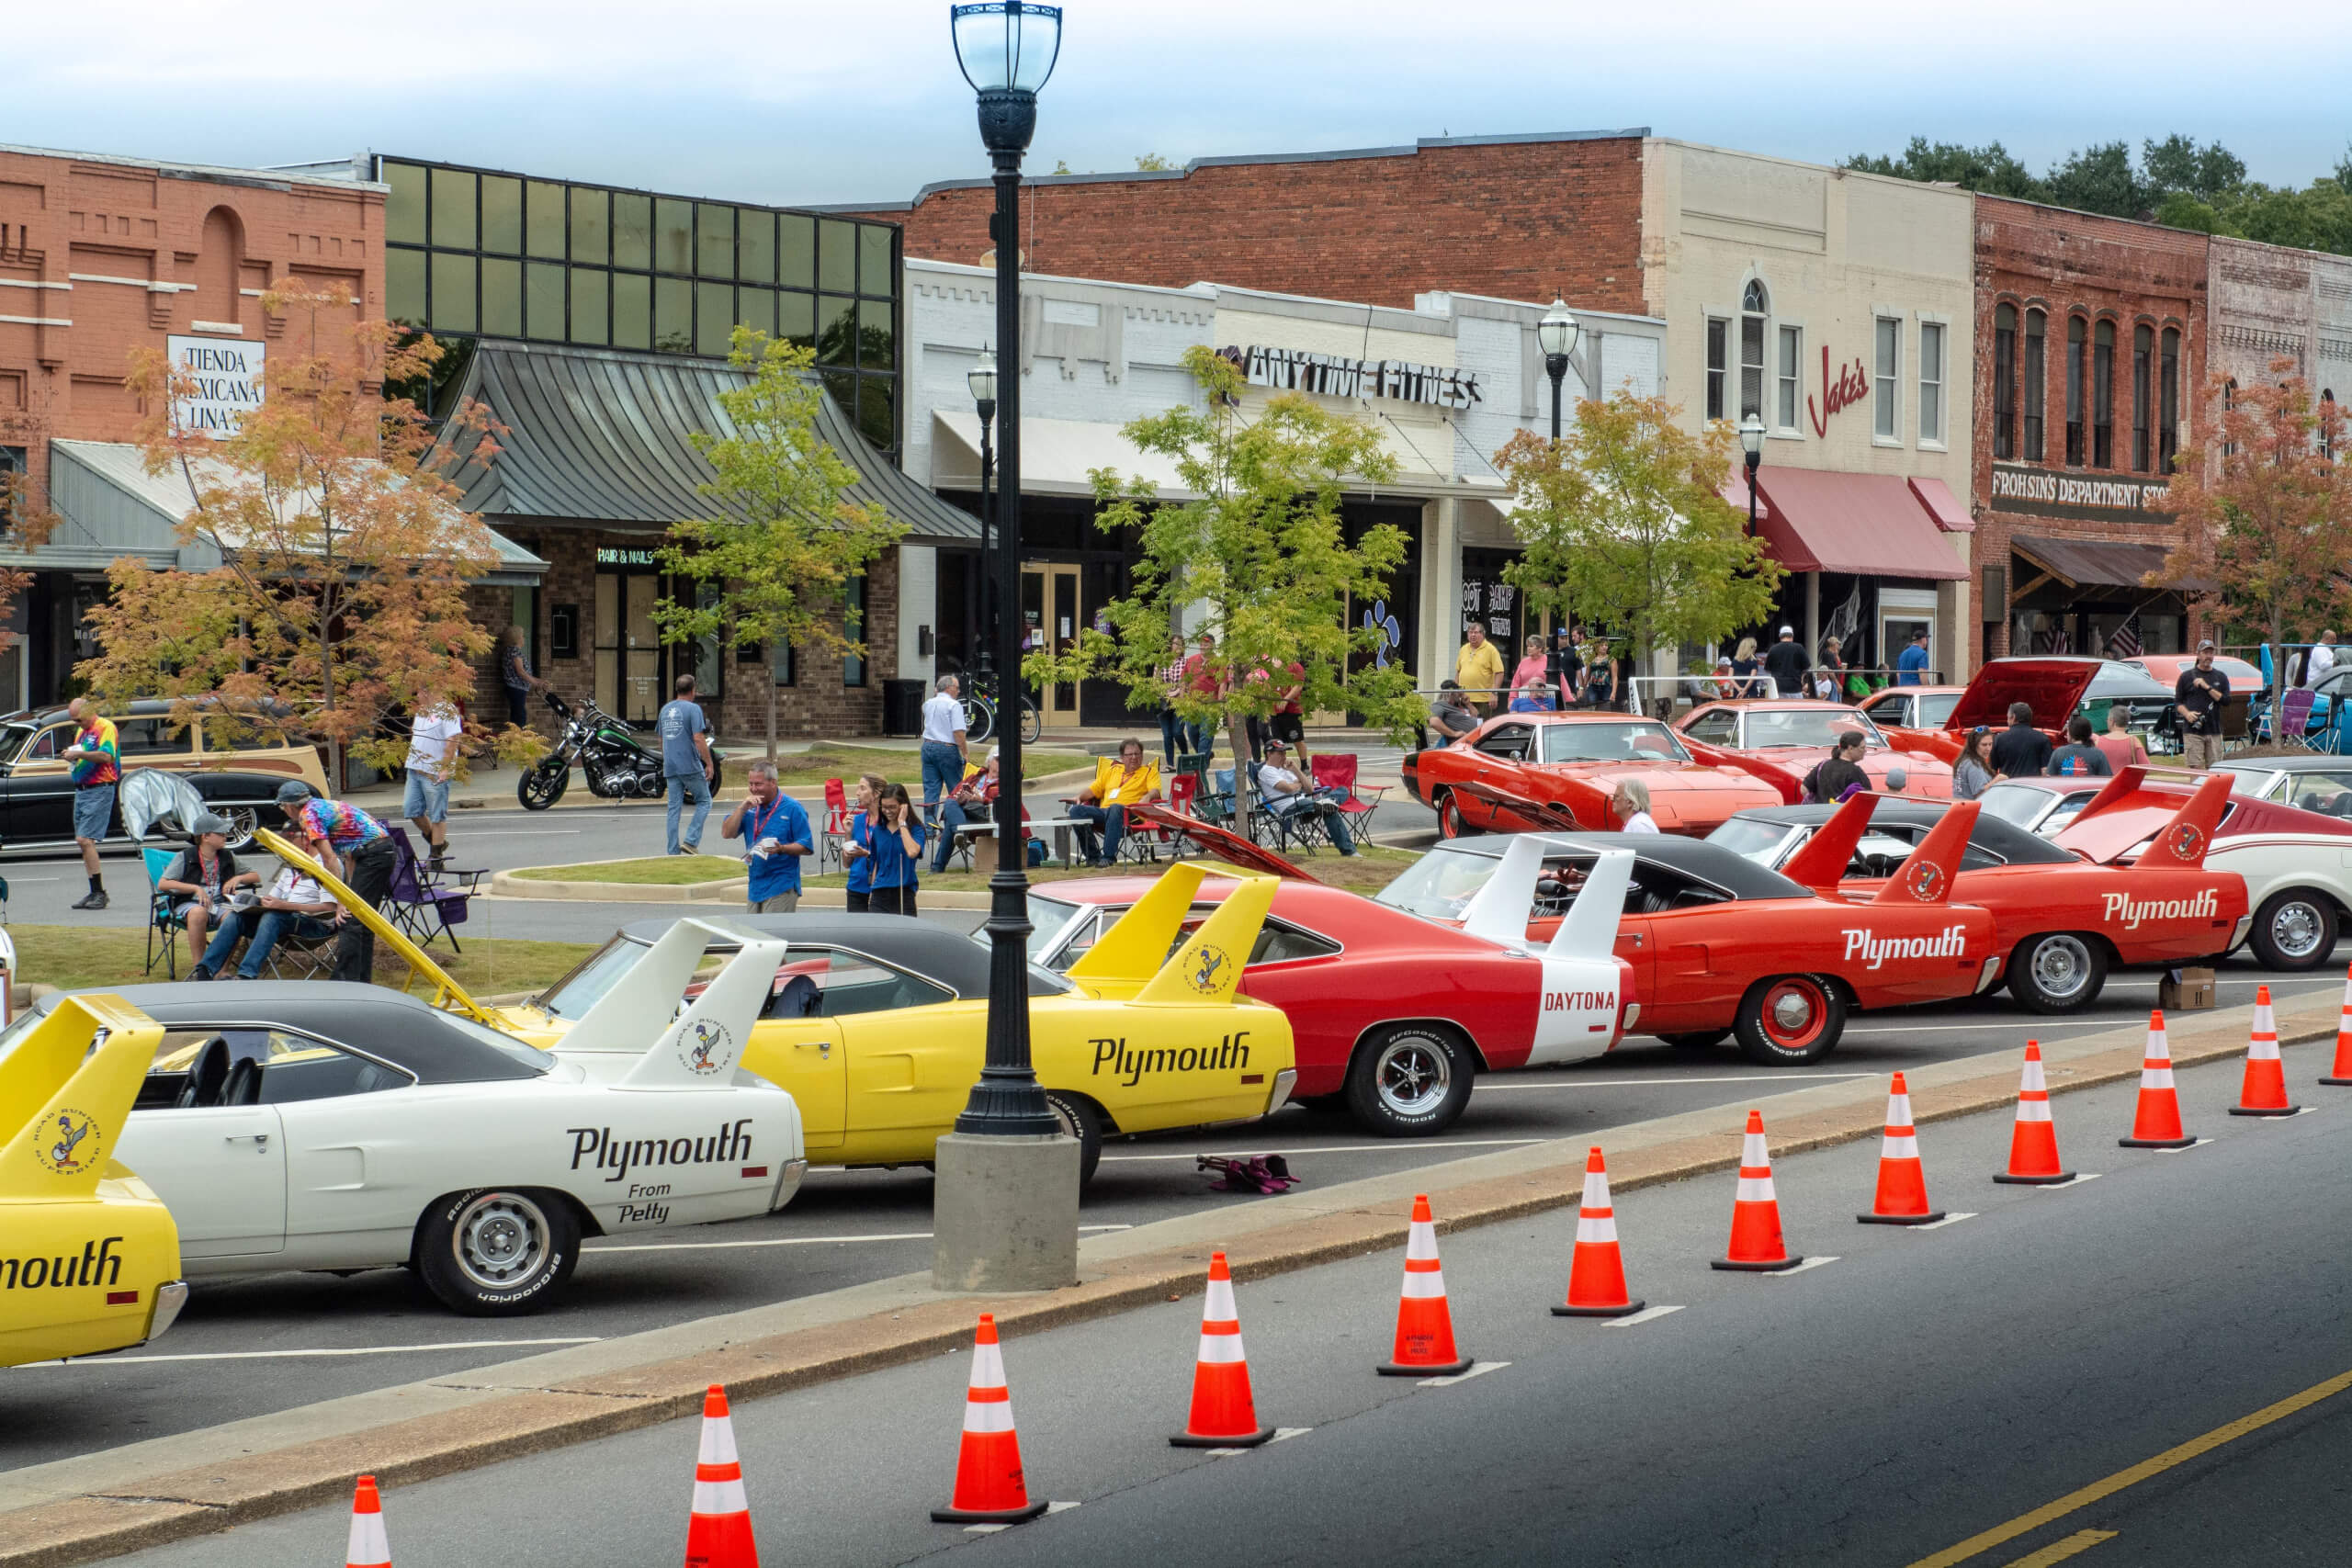 Scores of Plymouth Superbirds and Dodge Daytonas were on display at the 2019 Aero Warrior Reunion.